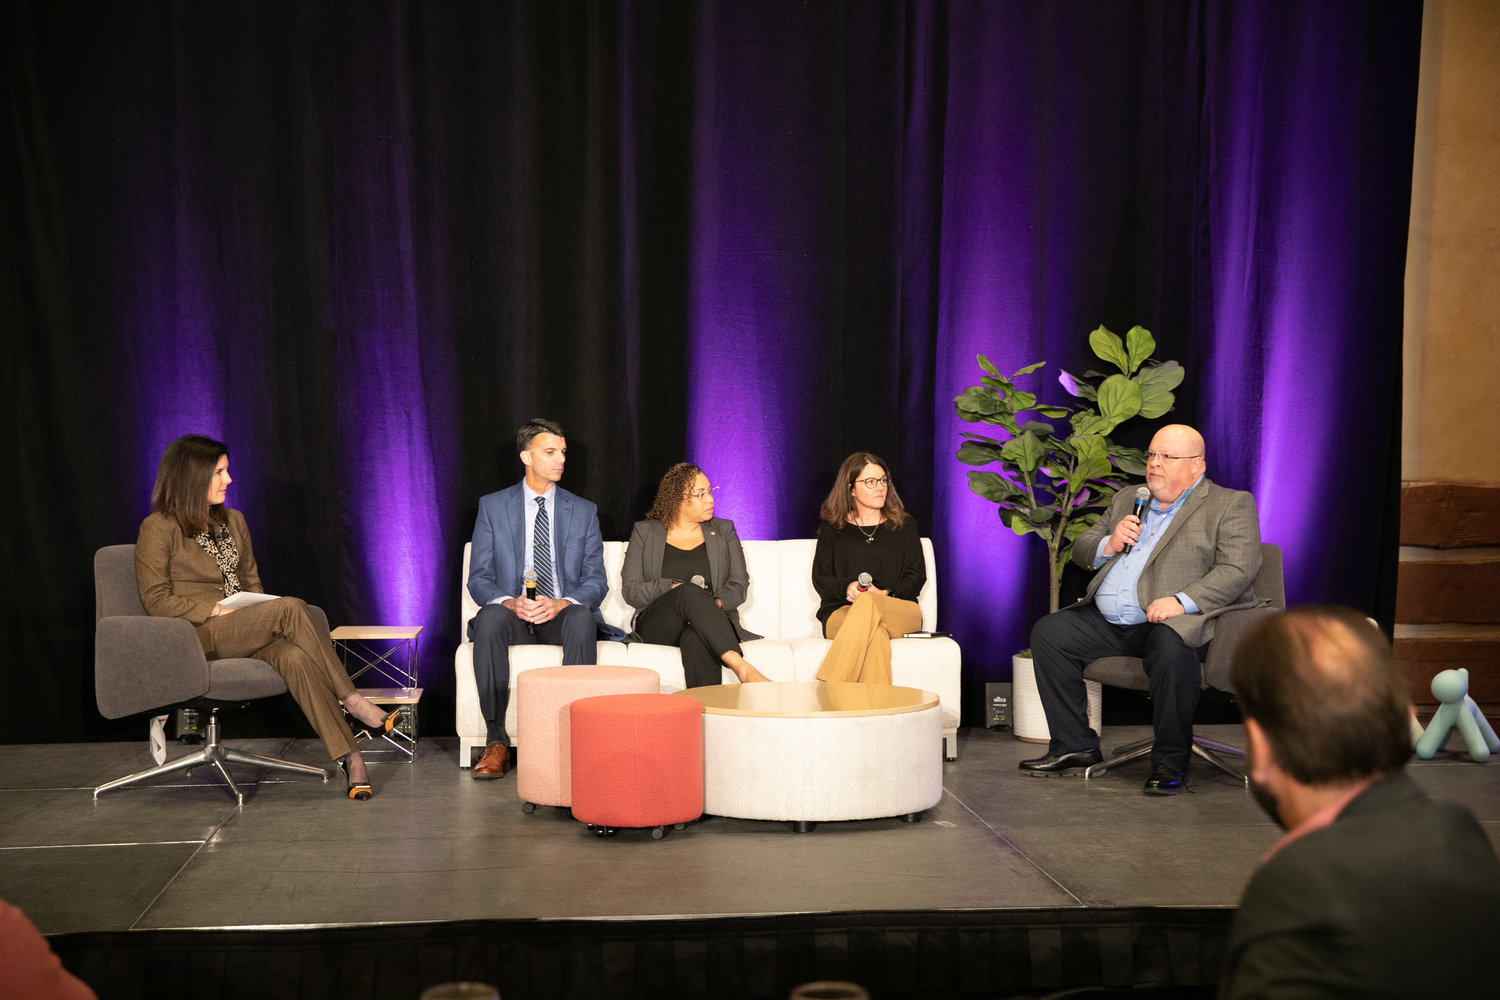 John Deere Reman’s Jena Holtberg-Benge, left, leads a panel discussion with Chris Stange of Digital Monitoring Products, Maria Matamoro of The French’s Food Co., Krisi Schell of SRC and Tim Massey of Penmac.